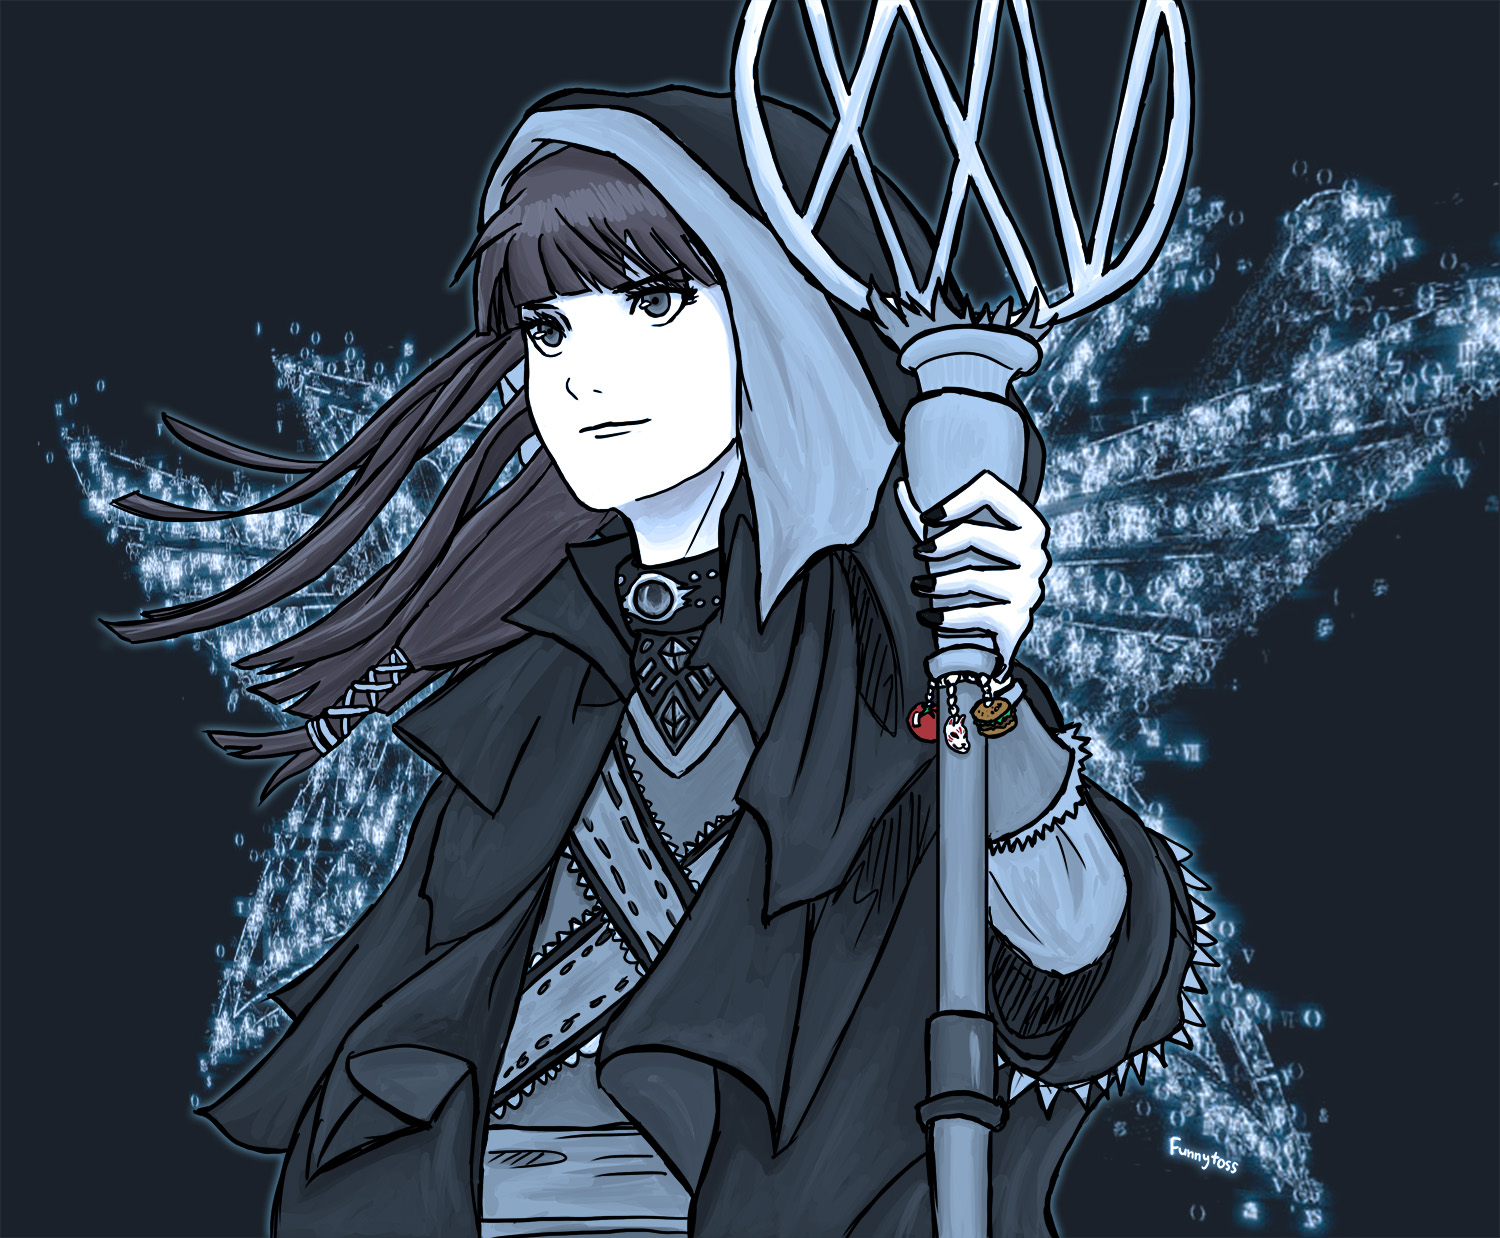 SU-METAL The Other One